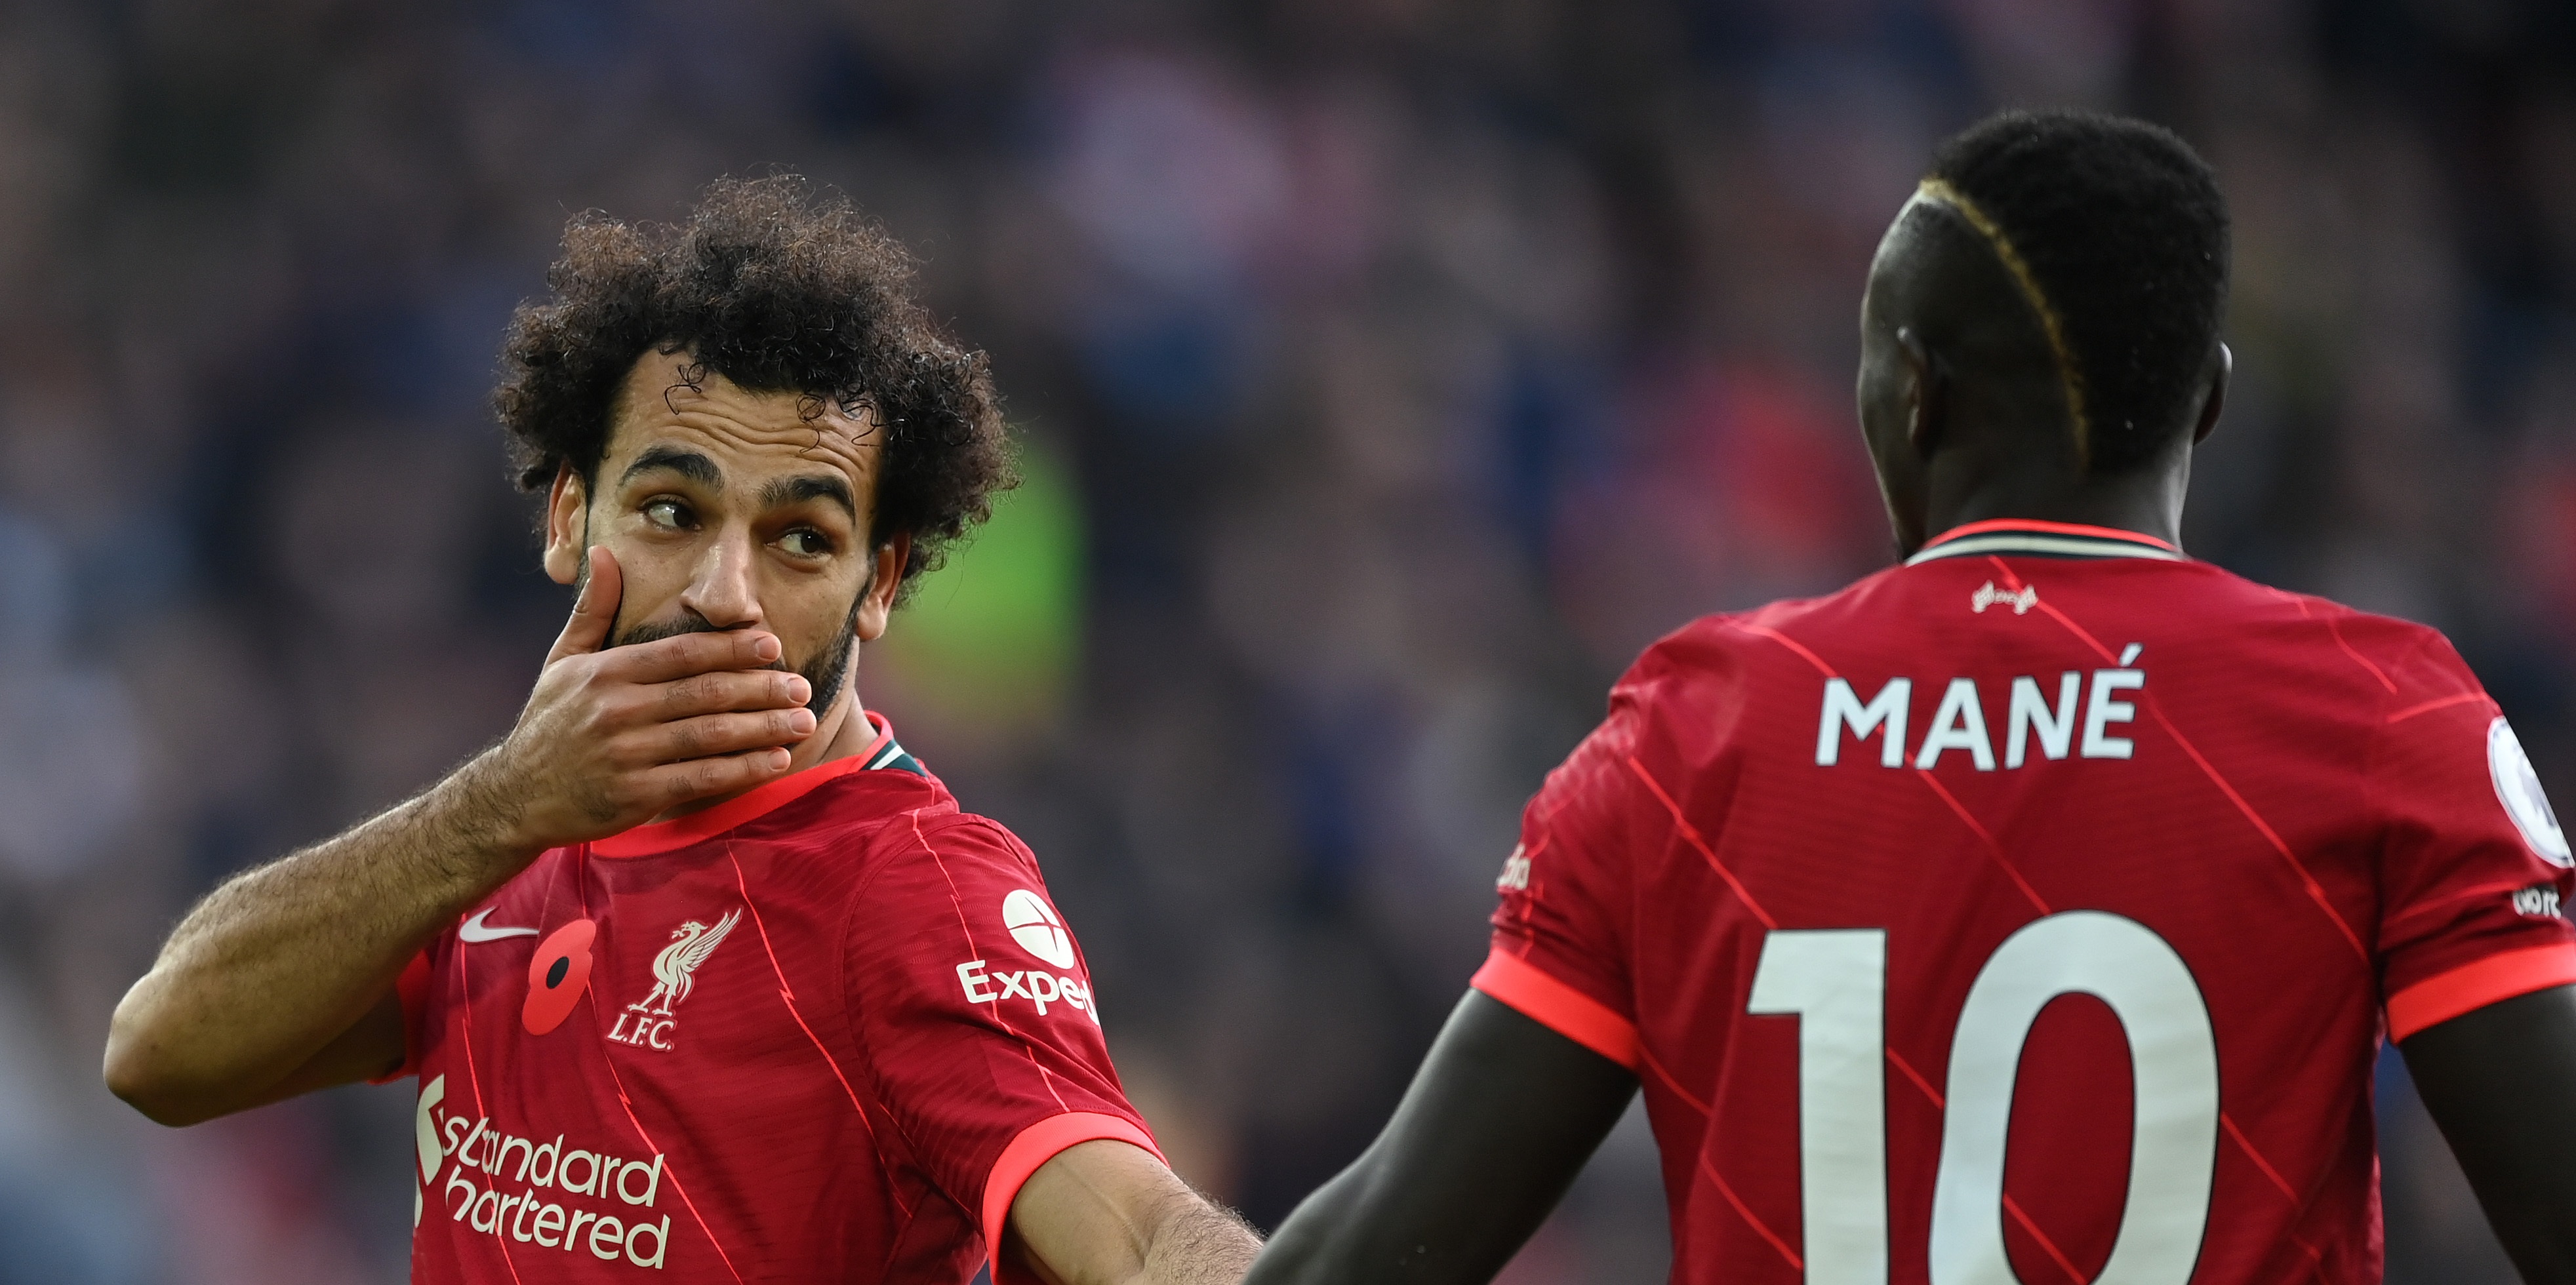 ‘They need each other’ – Dirk Kuyt weighs in on Salah and Mane’s differing emotions following AFCON outcome